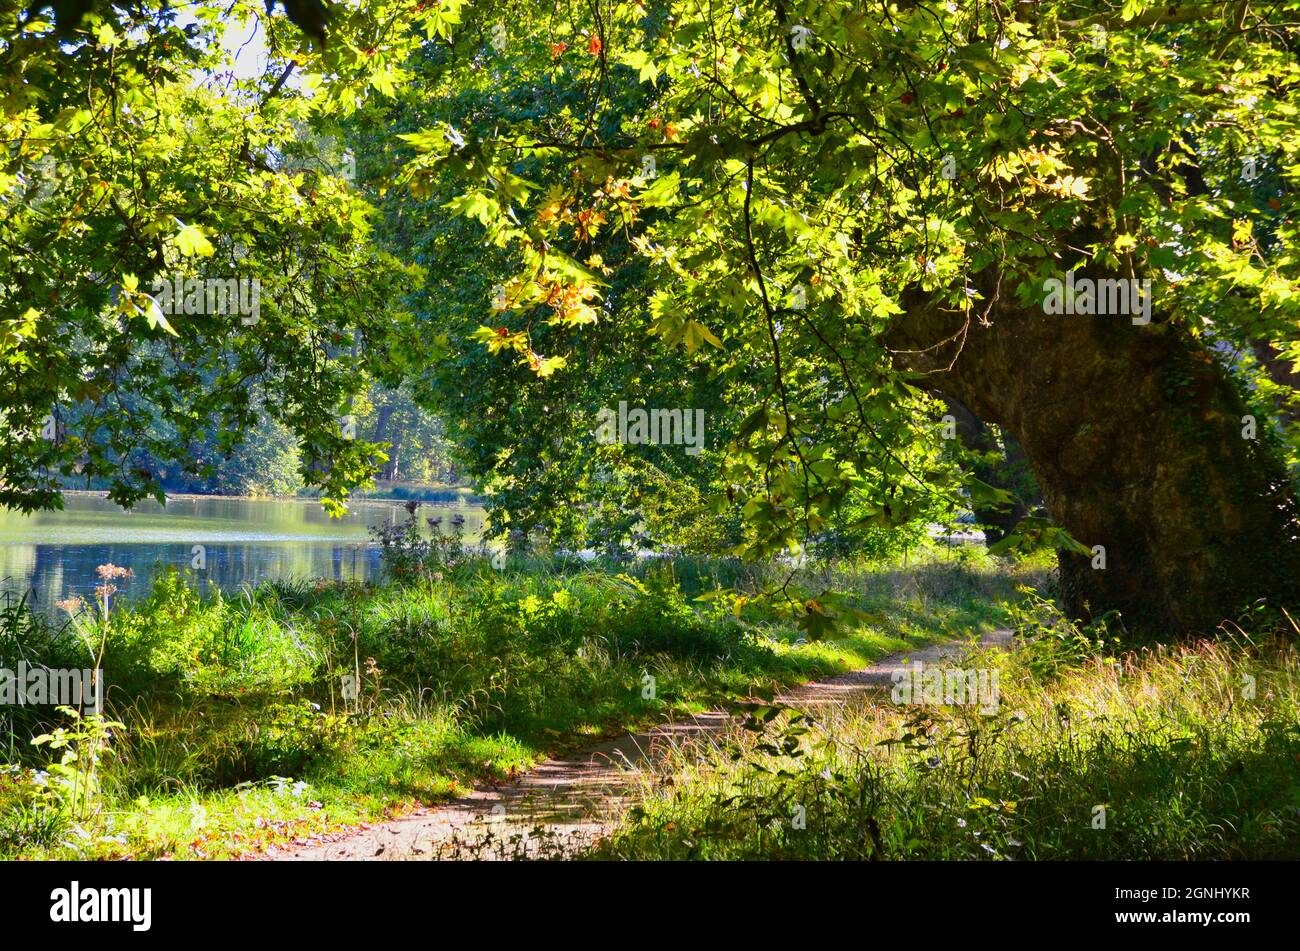 Parc of Ermenonville in the oise area in france Stock Photo